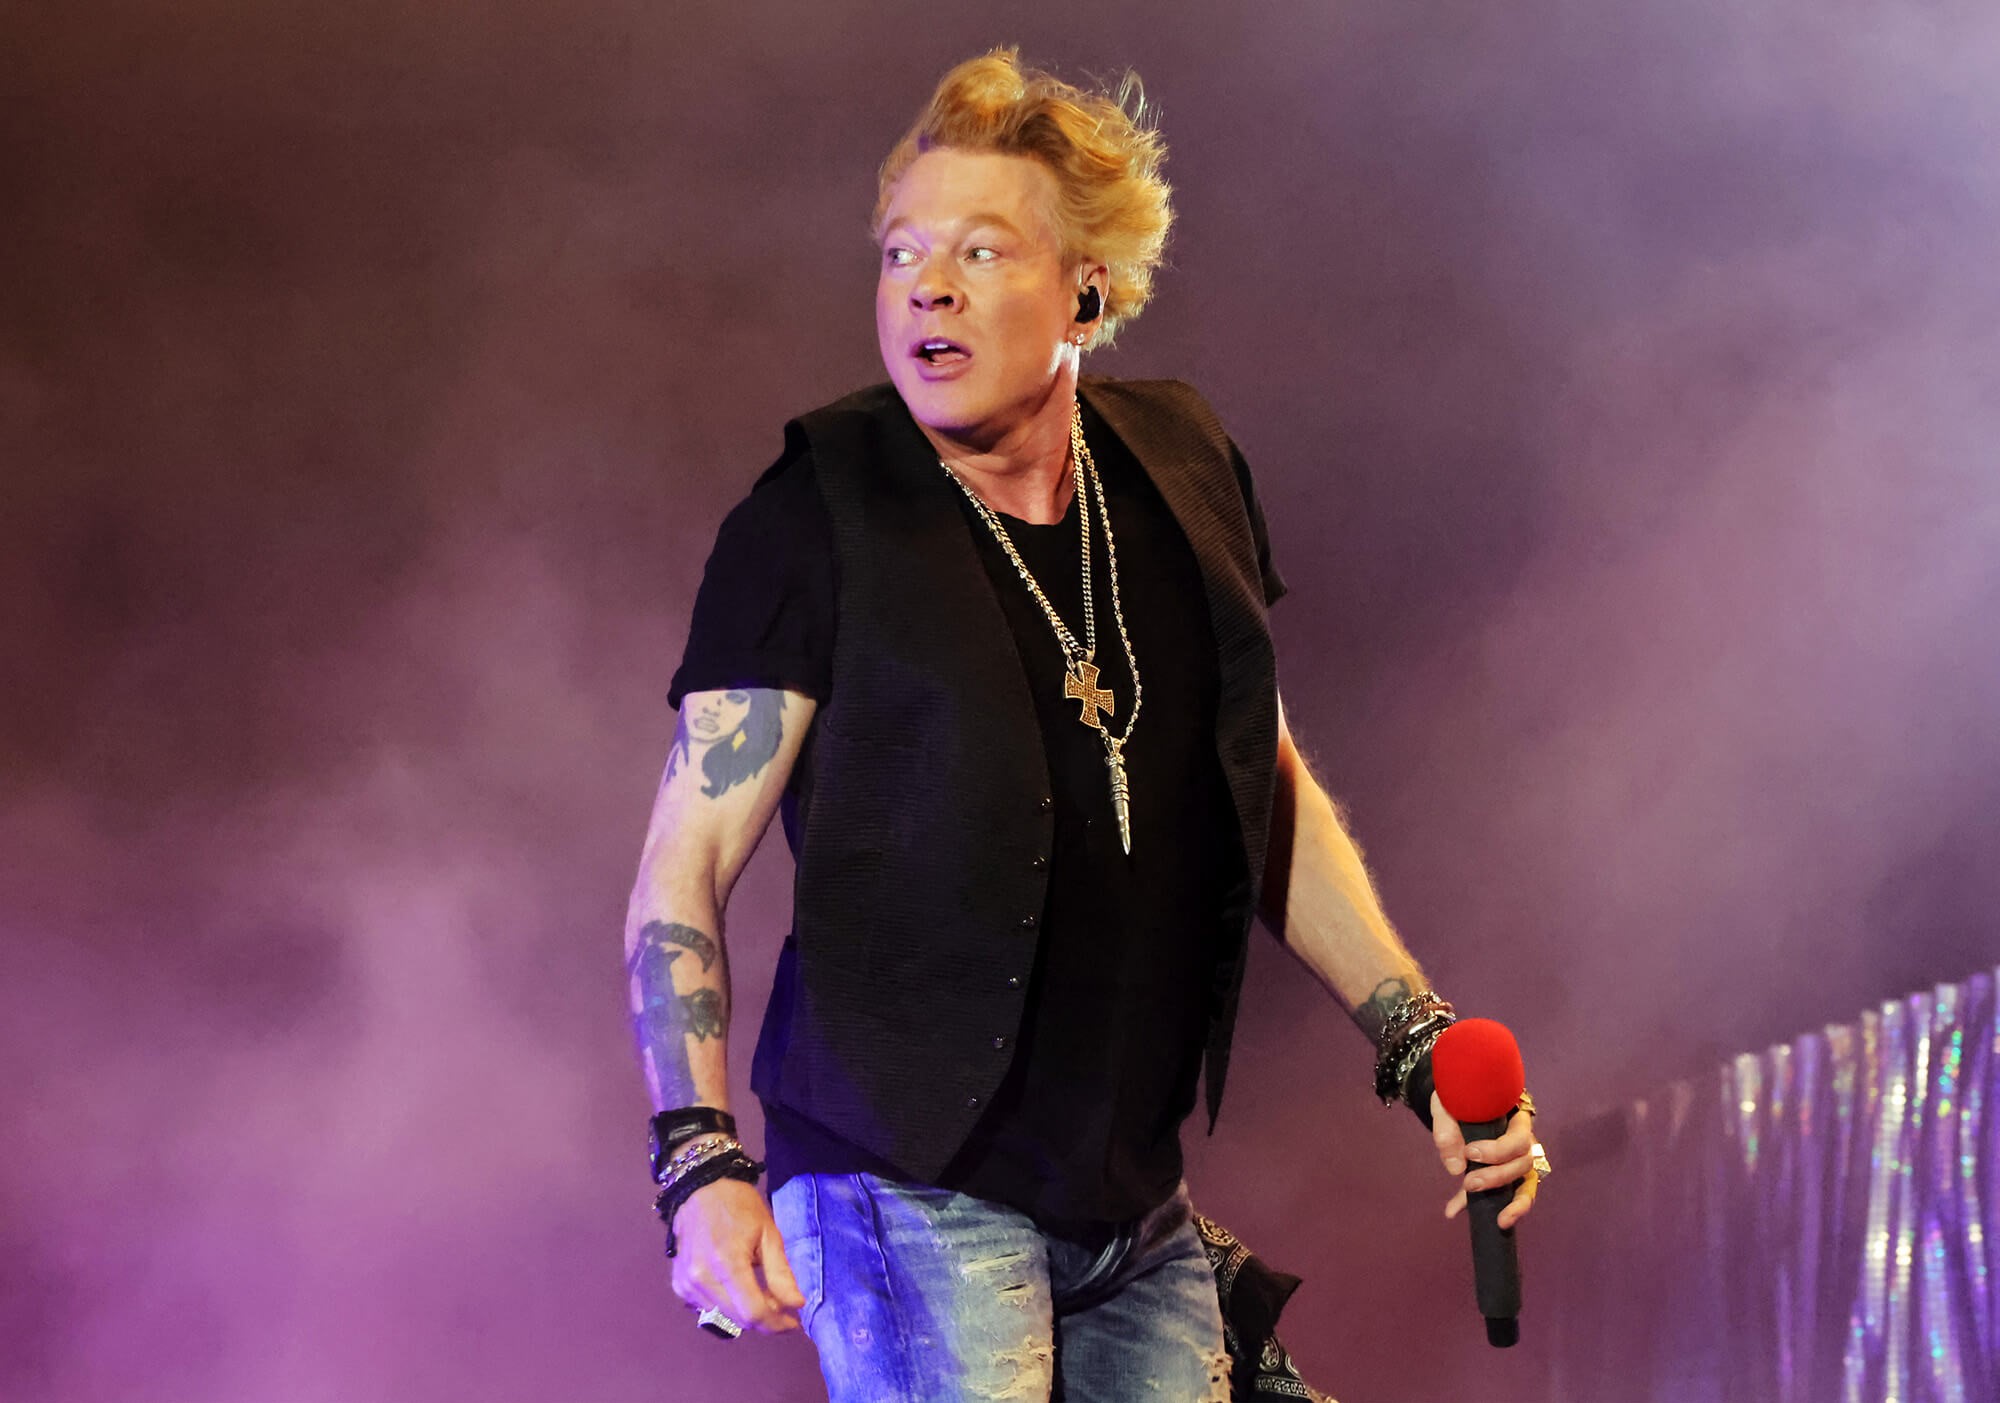 35 Facts about Axl Rose - Facts.net